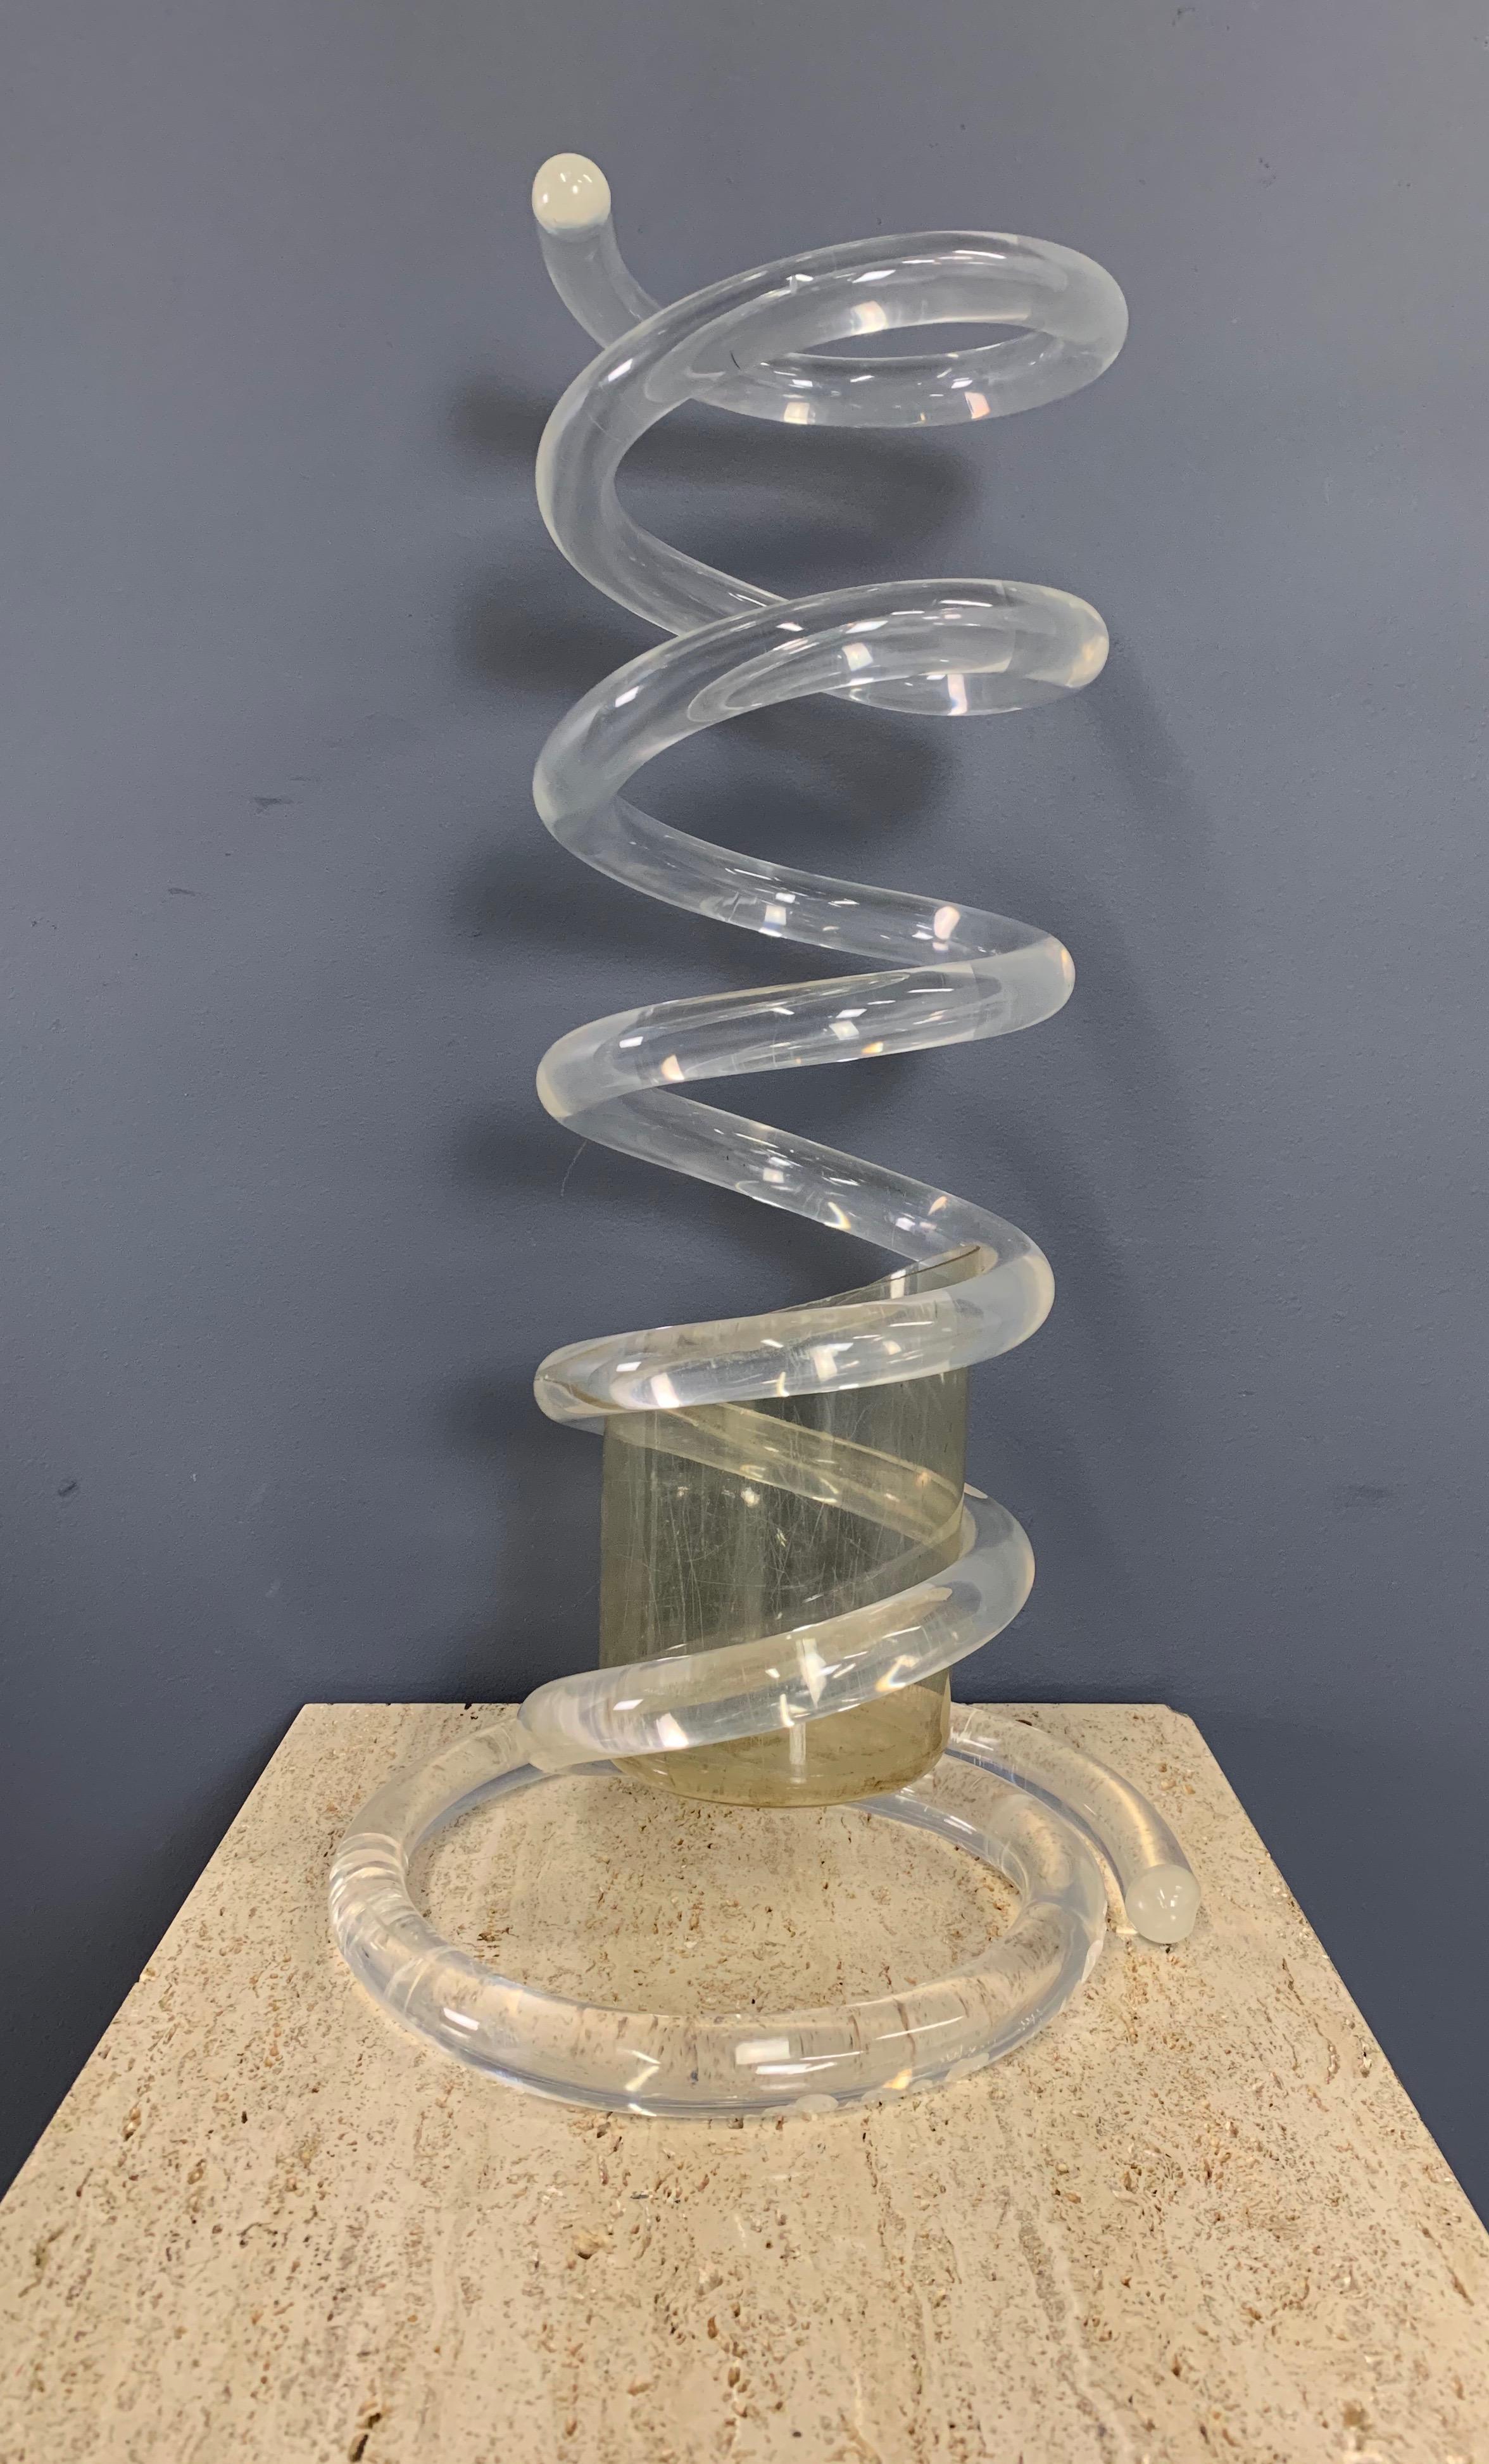 Whimsical coiled Lucite umbrella stand looking like a snake in the style of Dorothy Thorpe.